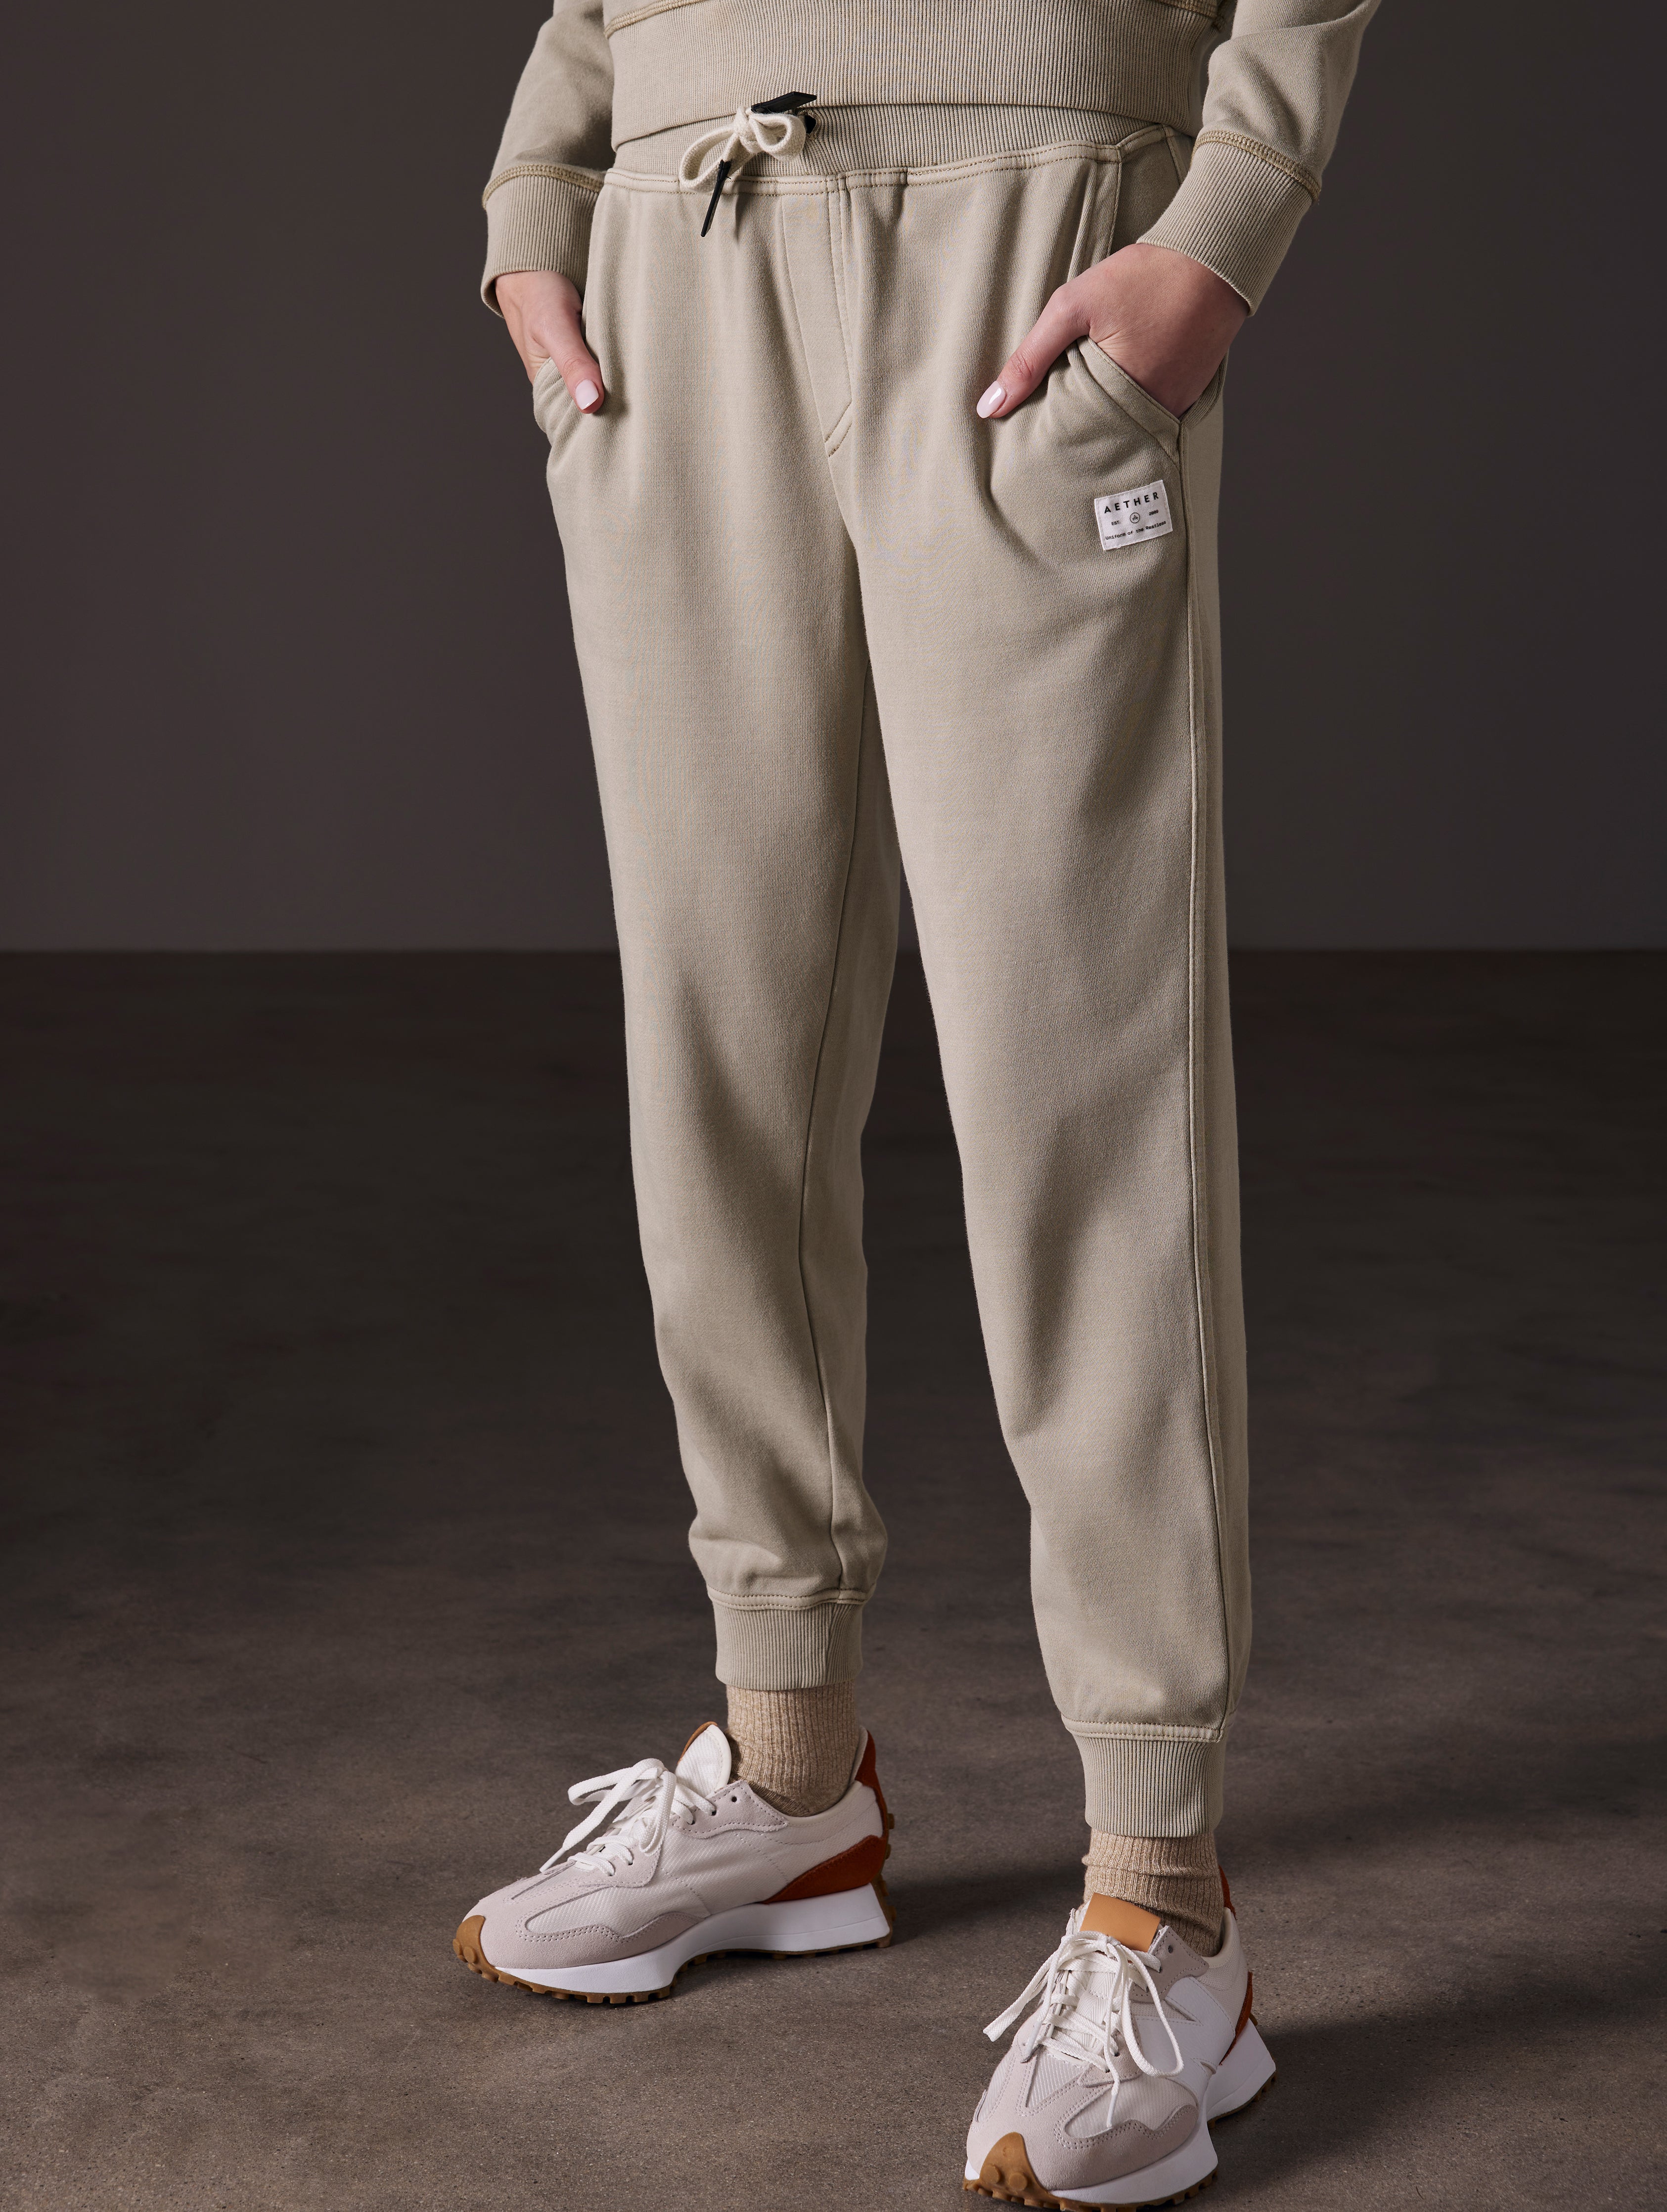 Aether Capitol Pants - Women's